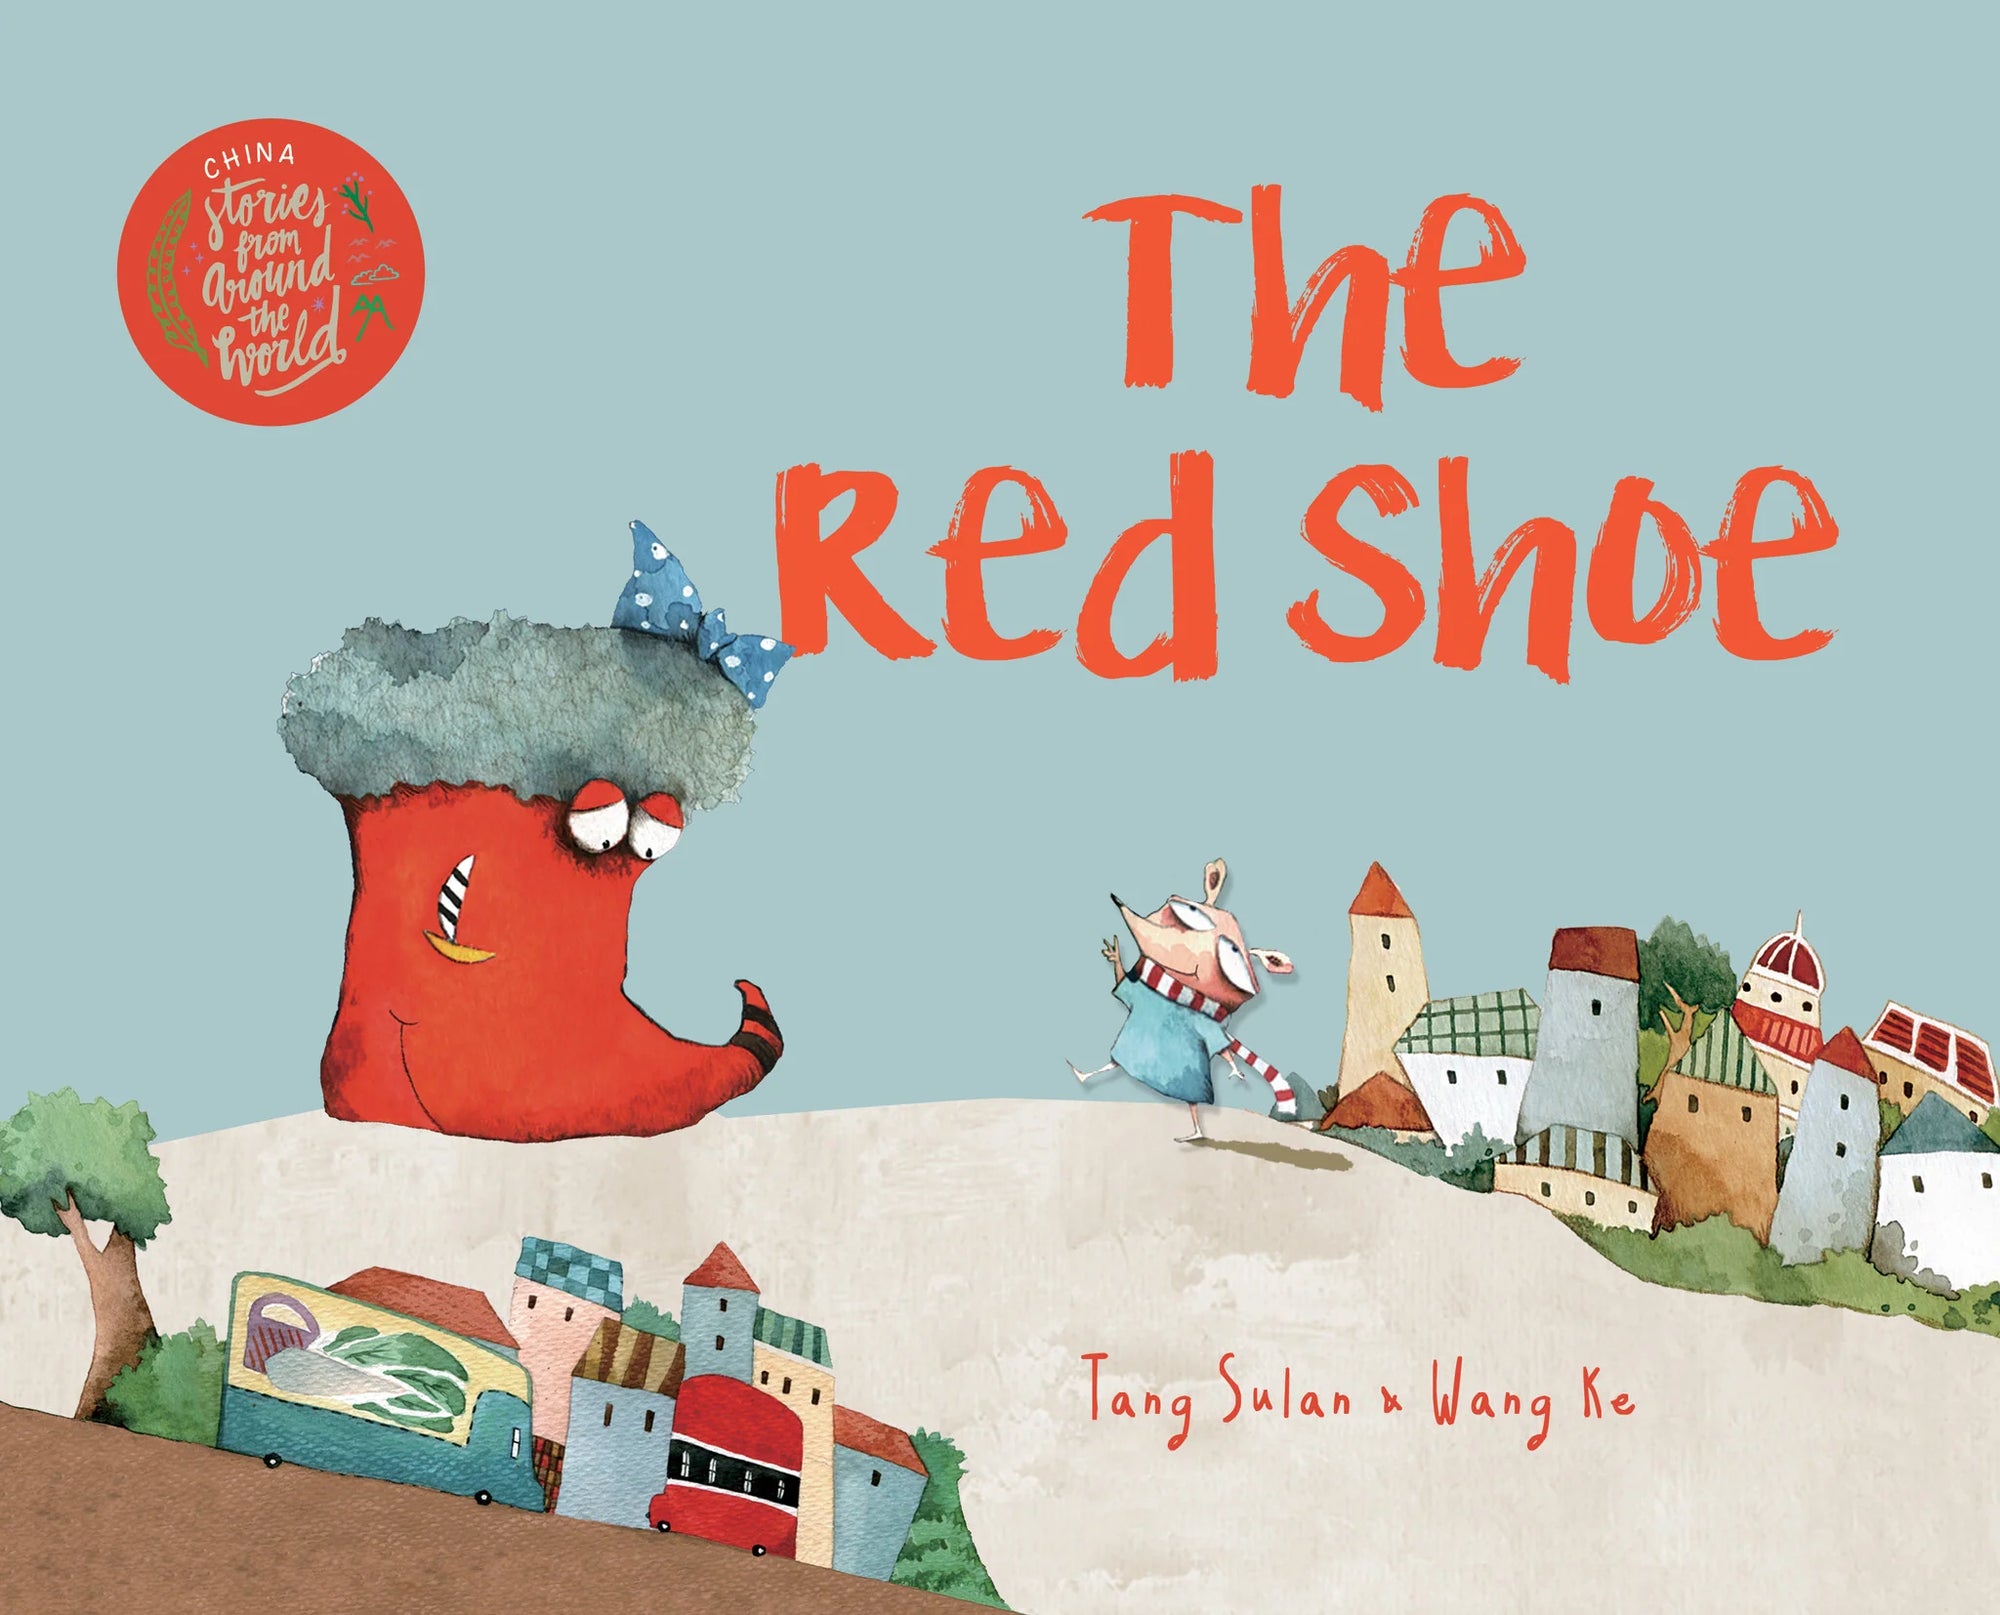 Stories From Around The World (China): Red Shoe